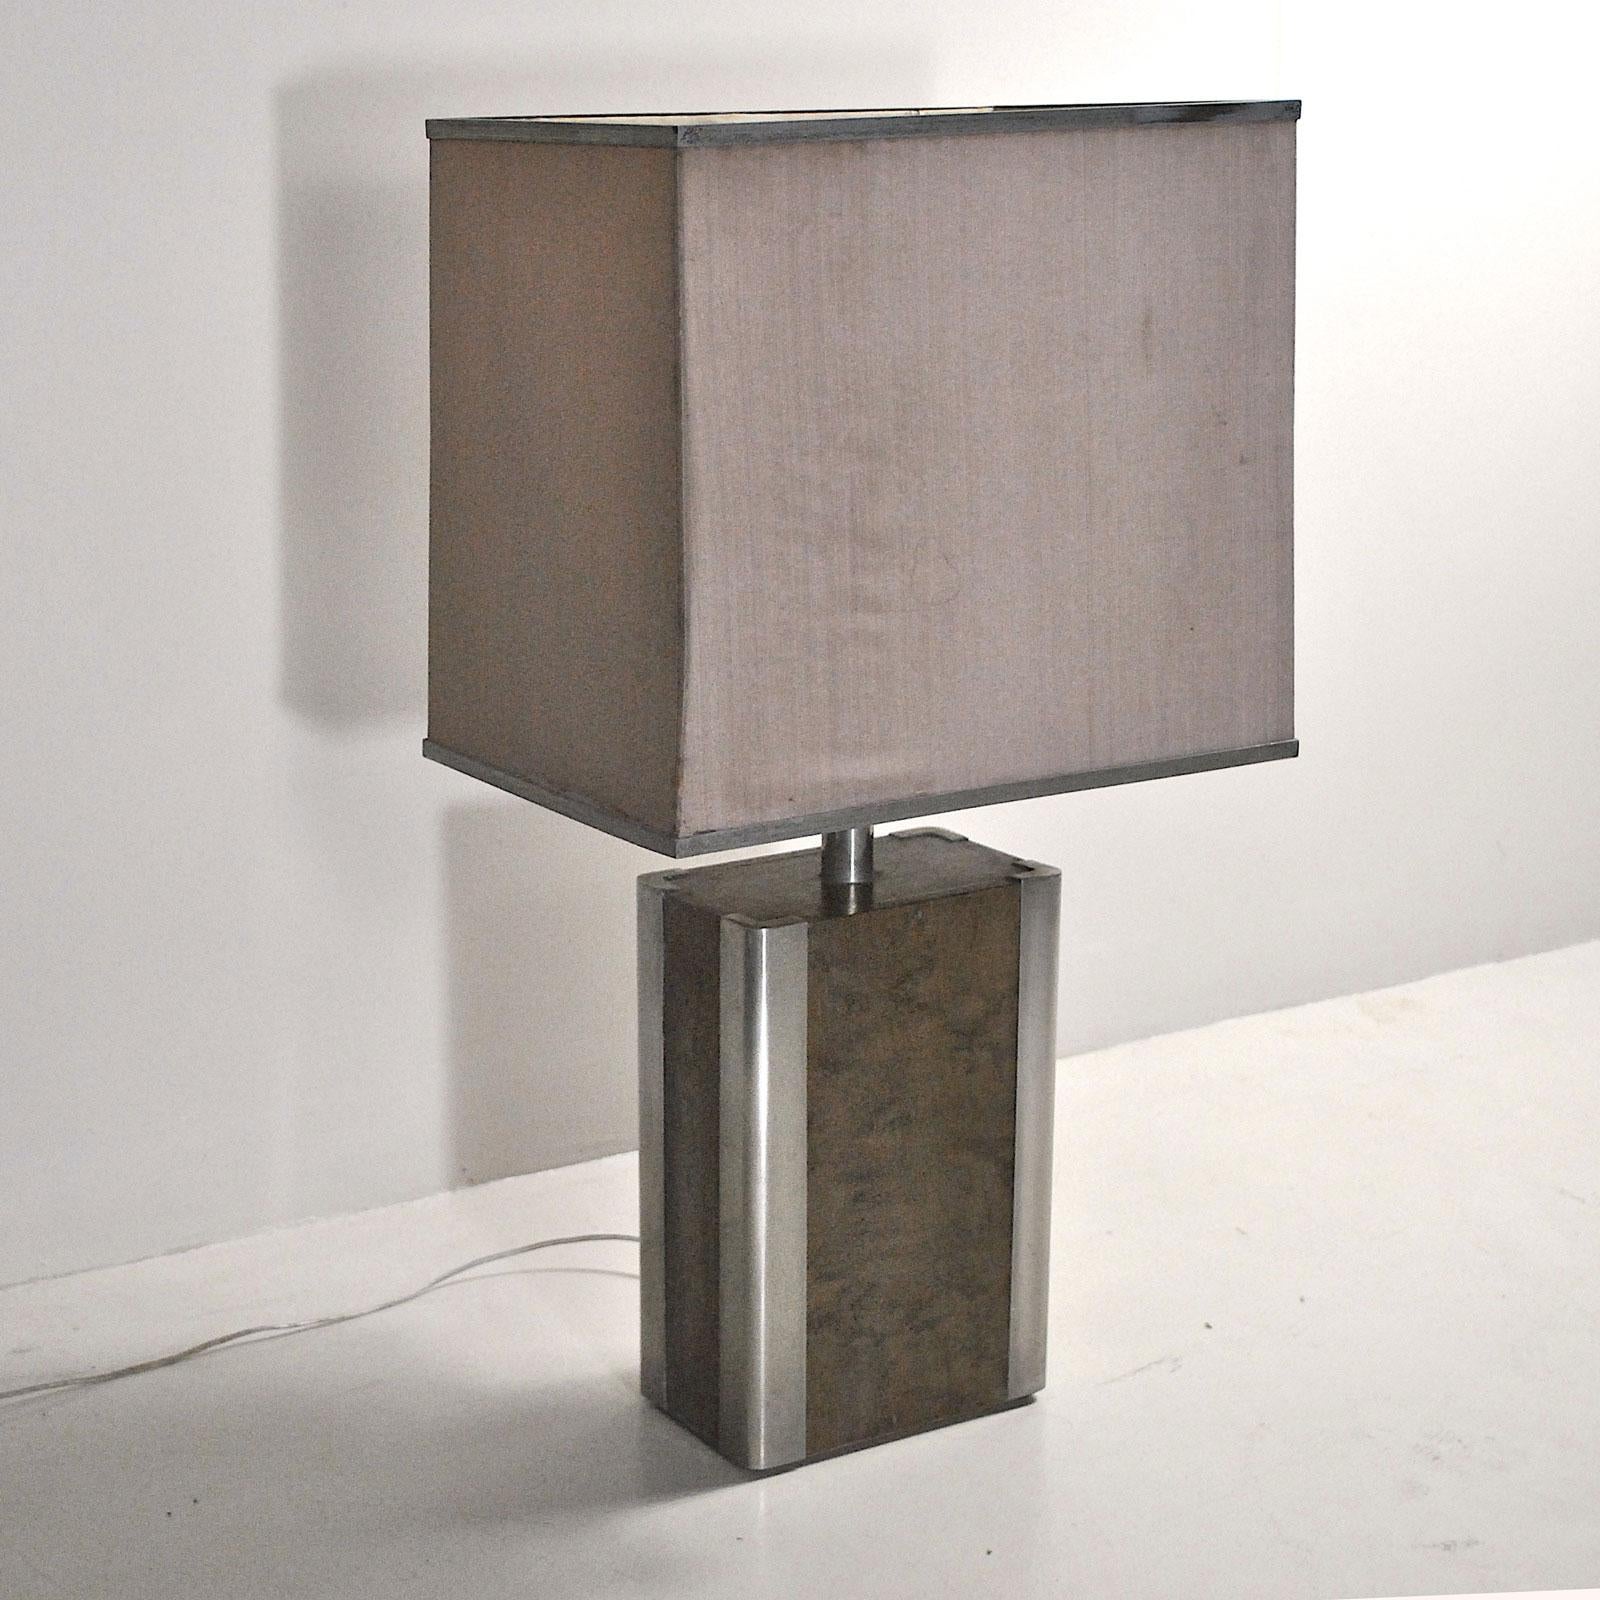 Italian Midcentury Table Lamp in Drawn Wood and Steel from the 1970s 2